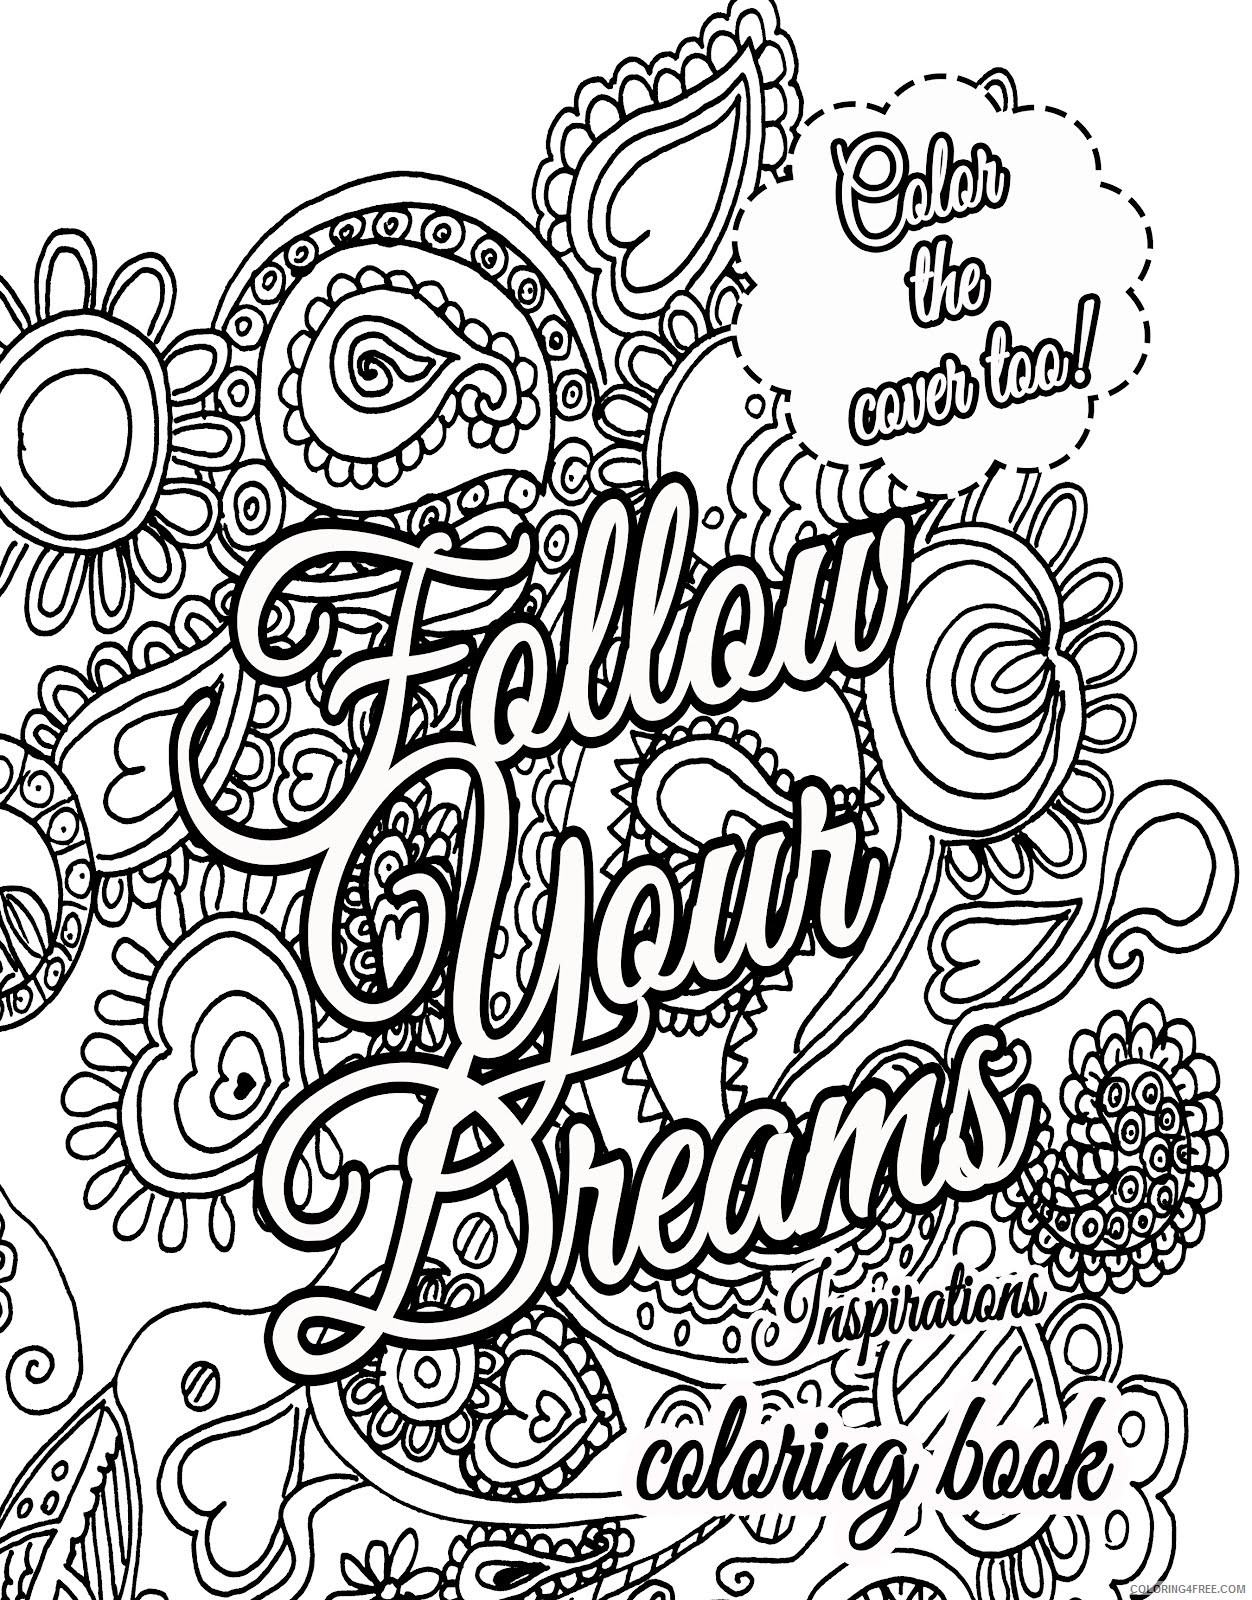 quote coloring pages about dream for adults Coloring4free